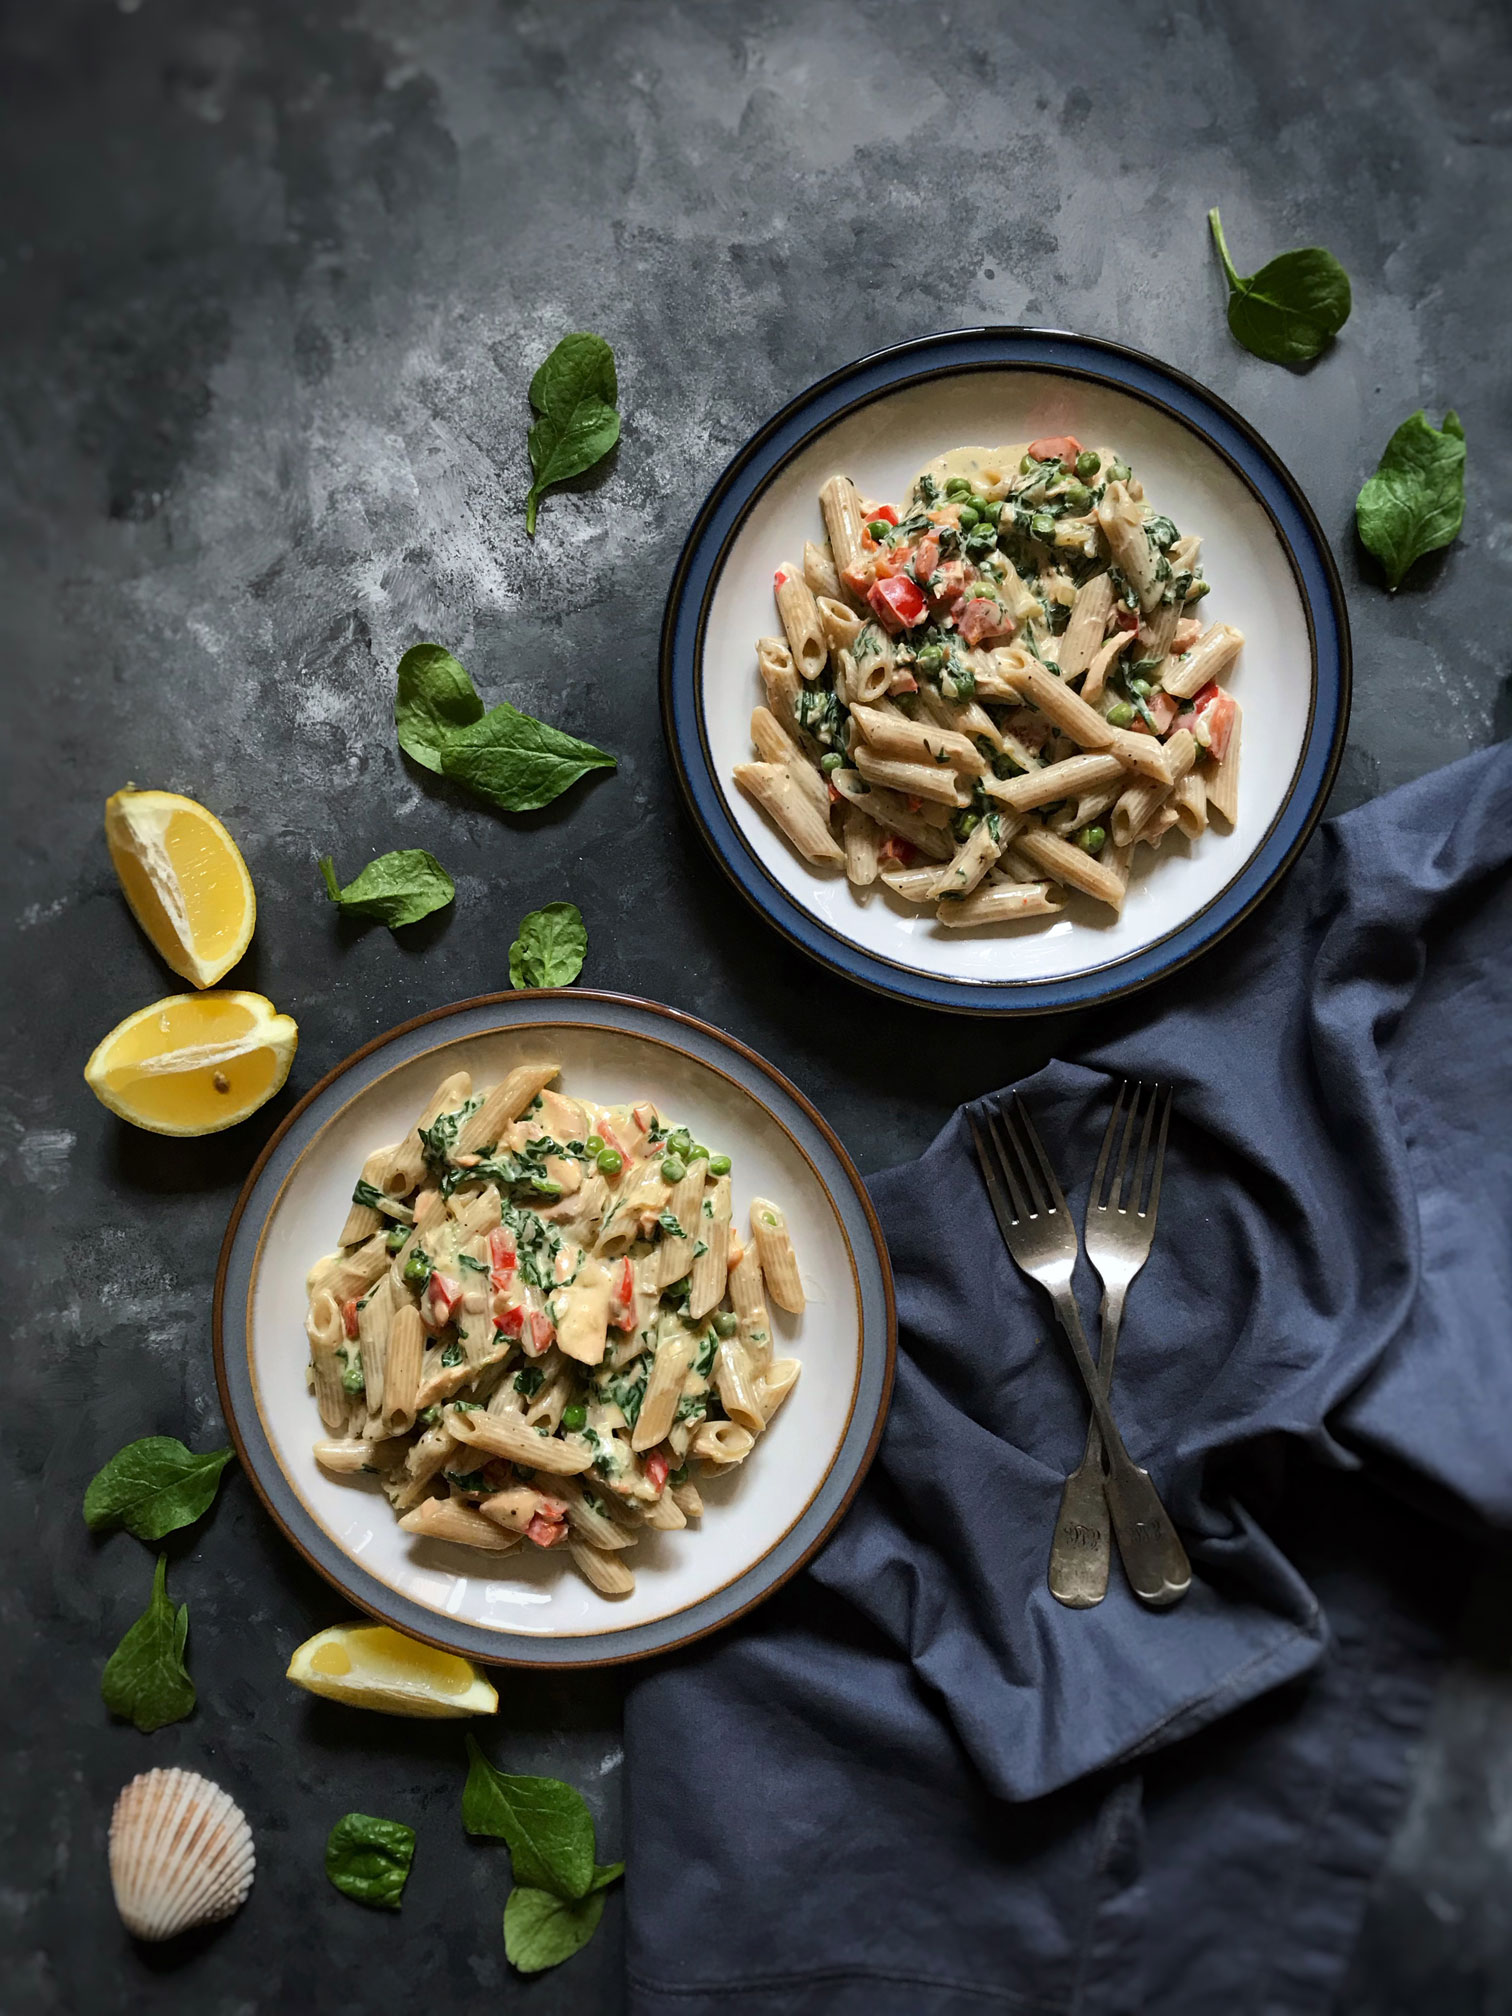 Salmon and veggies whole-wheat pasta in a dairy free cream sauce